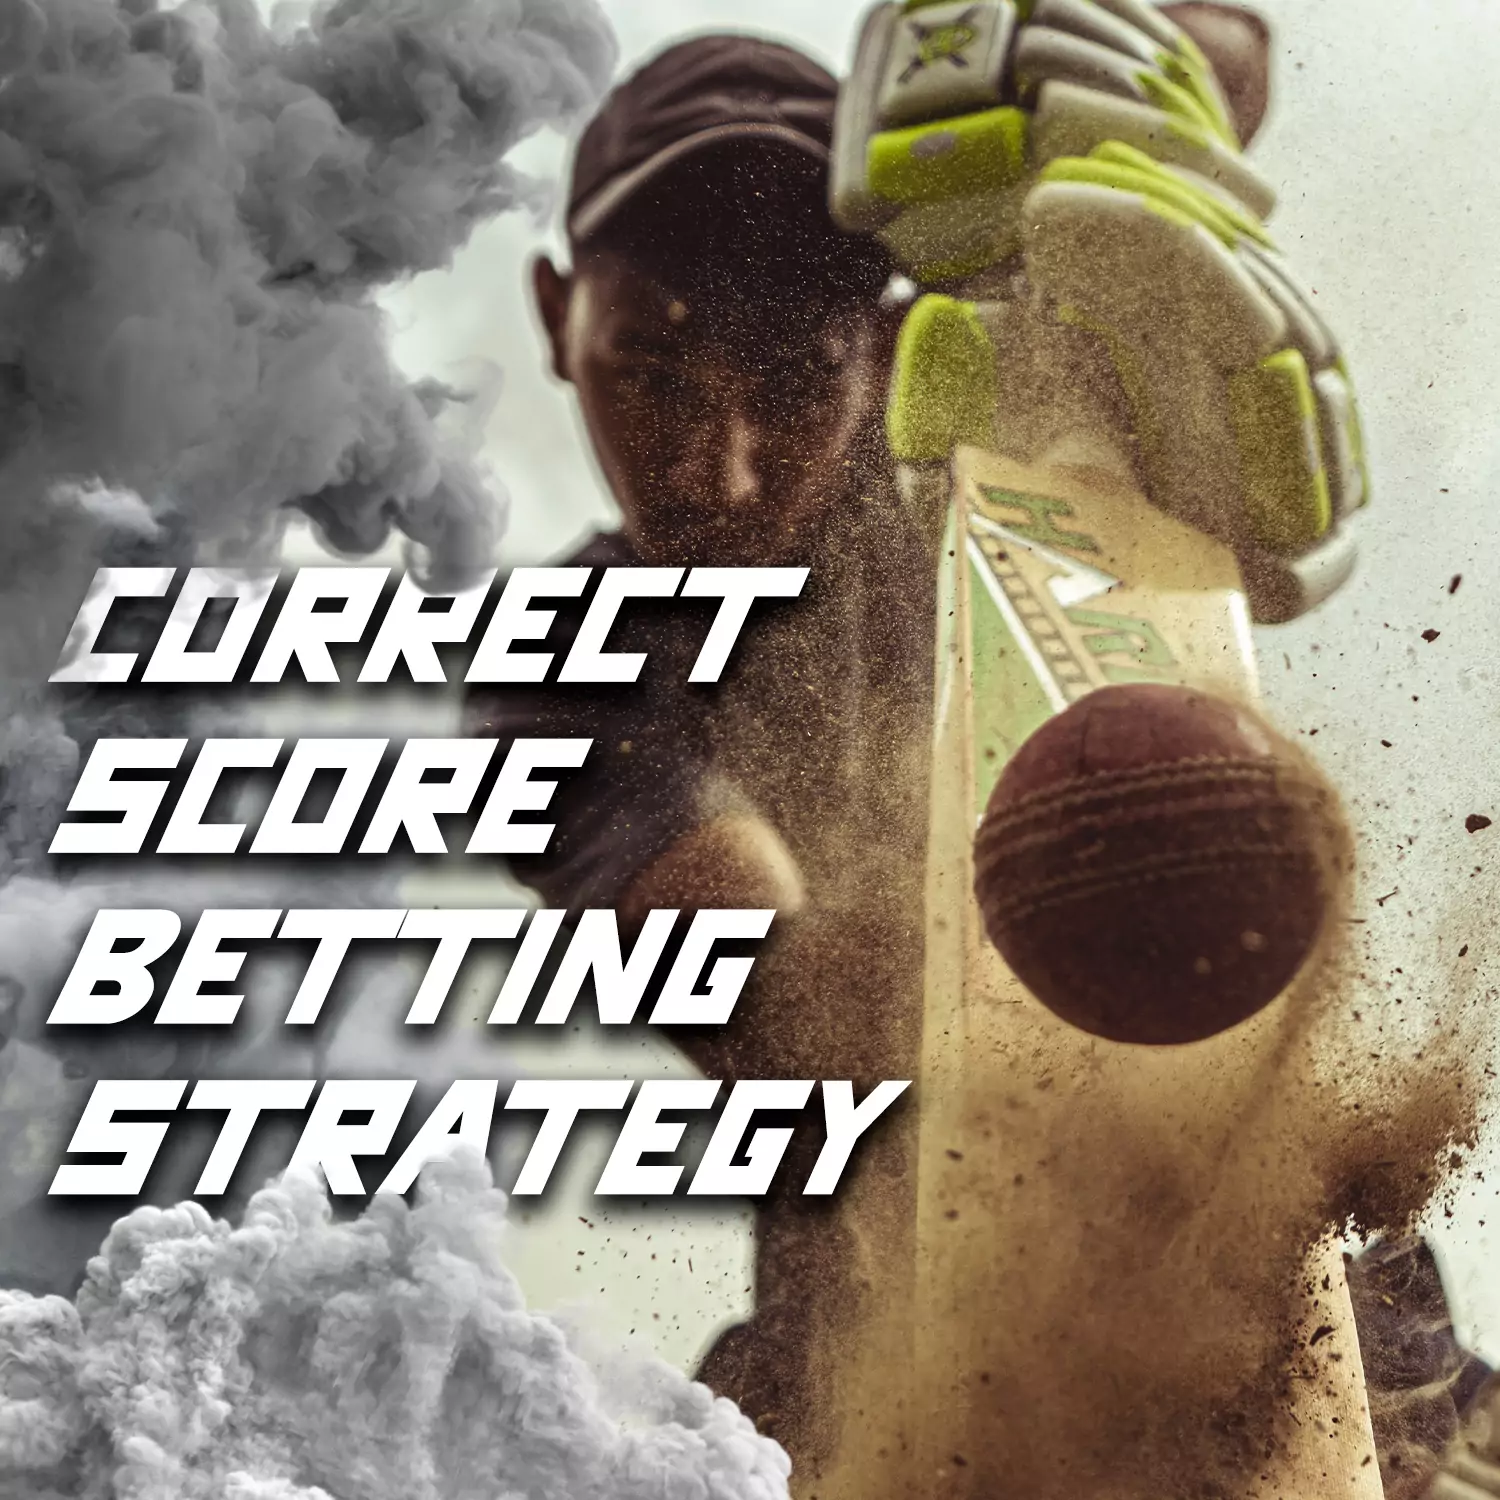 Learn how to use the Correct Score betting strategy in cricket.